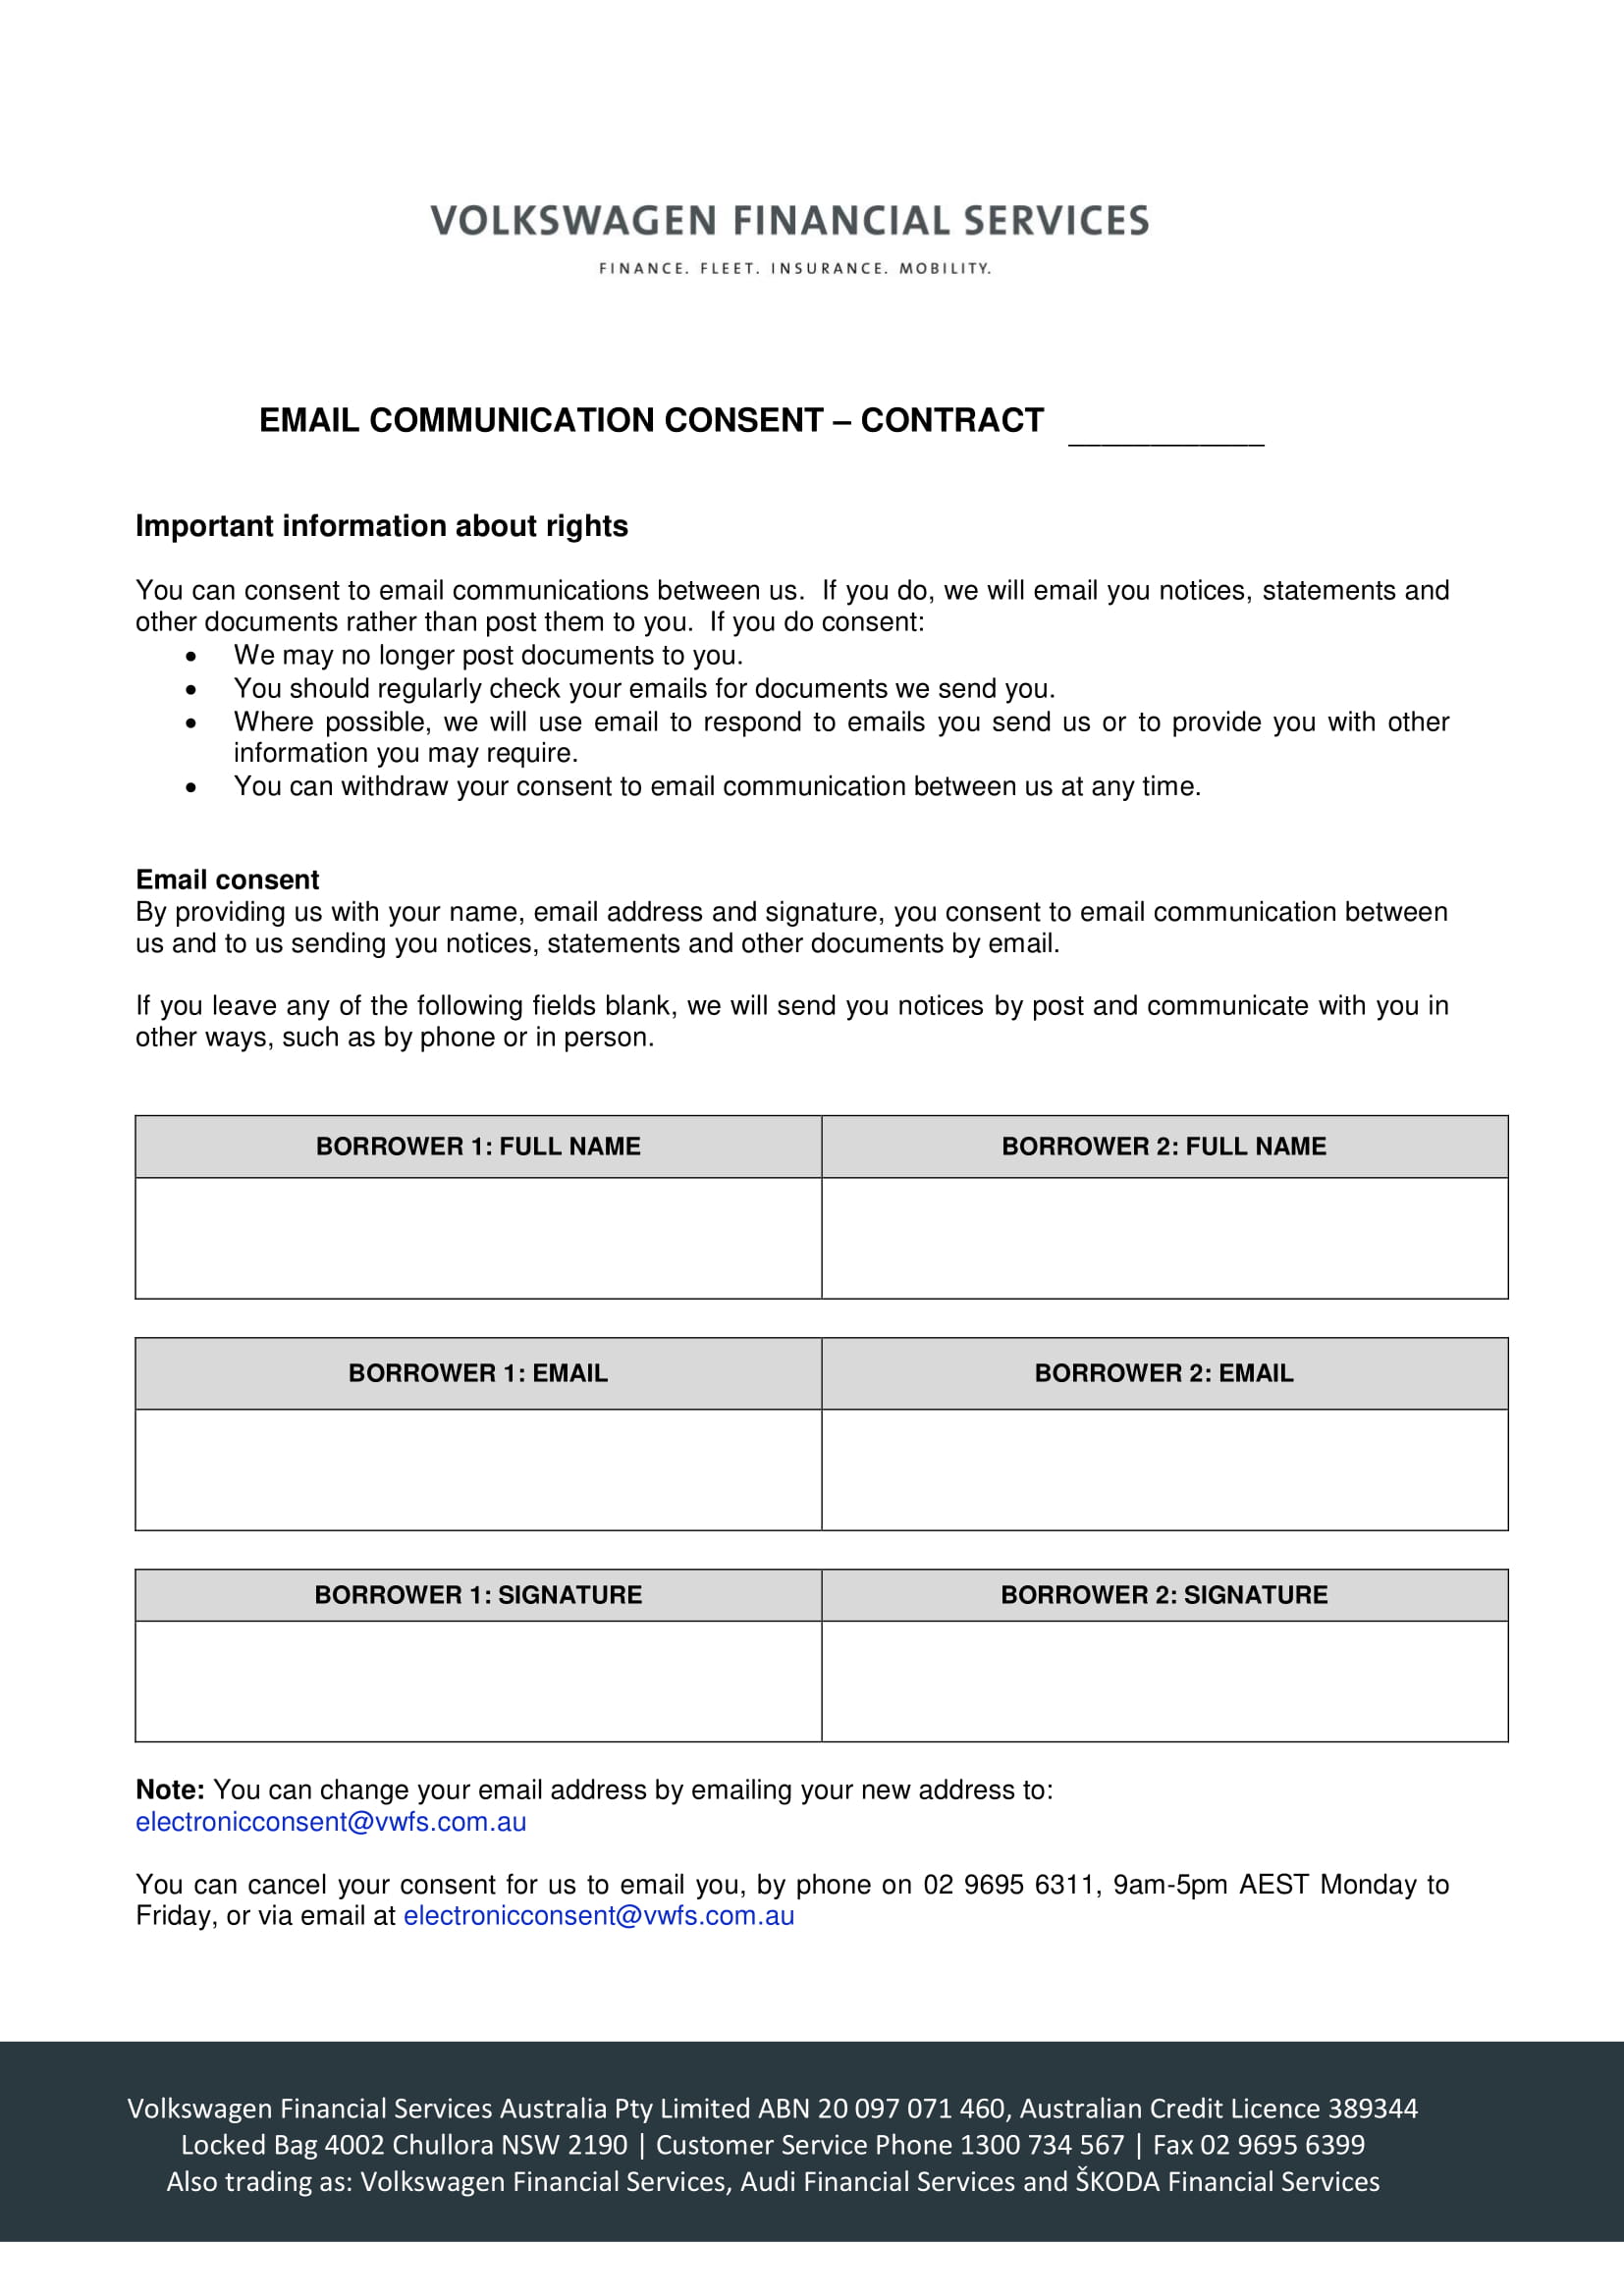 email communication consent contract form 1